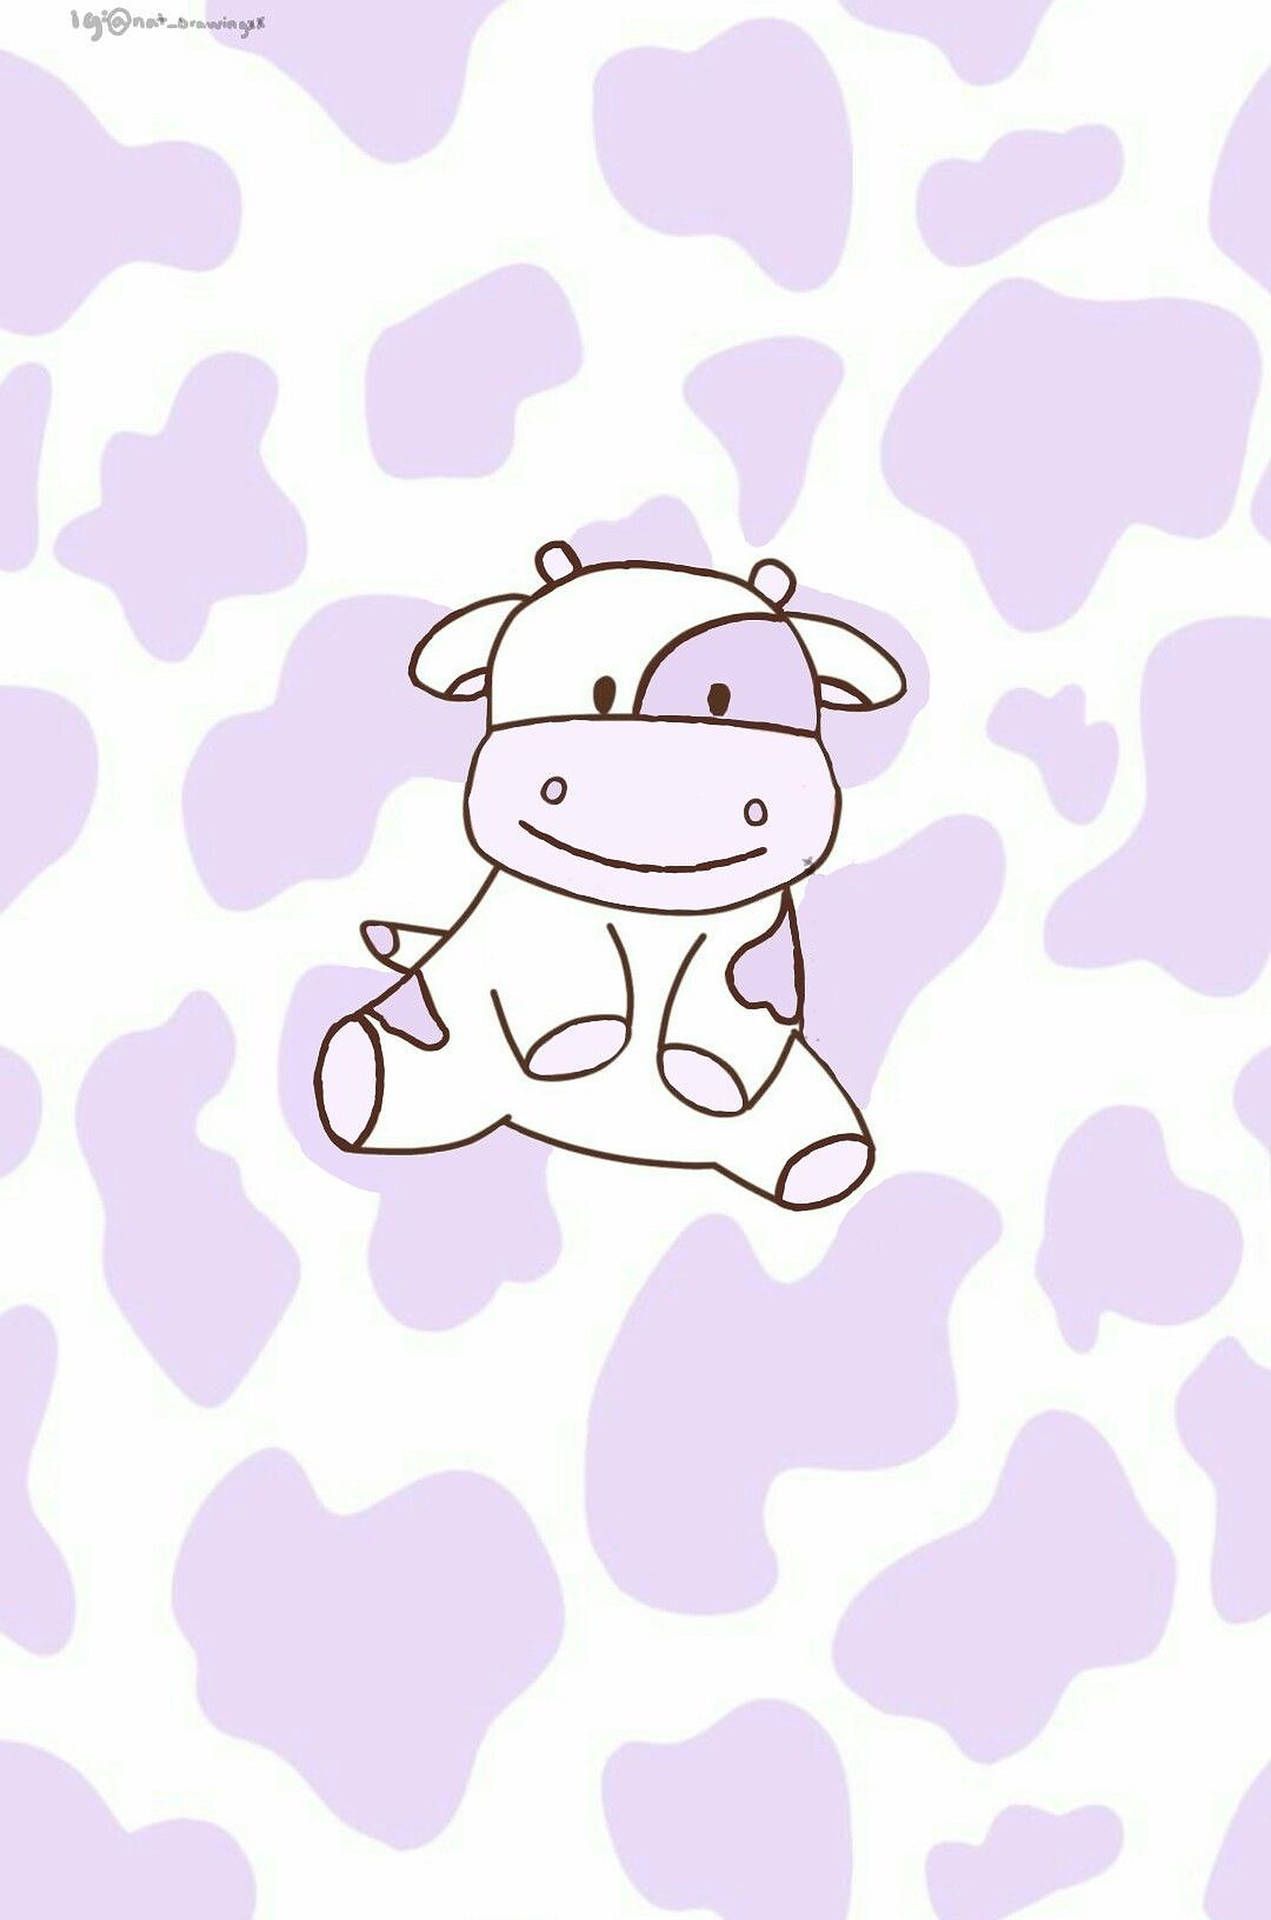 A cute cow on purple polka dot background - Cow